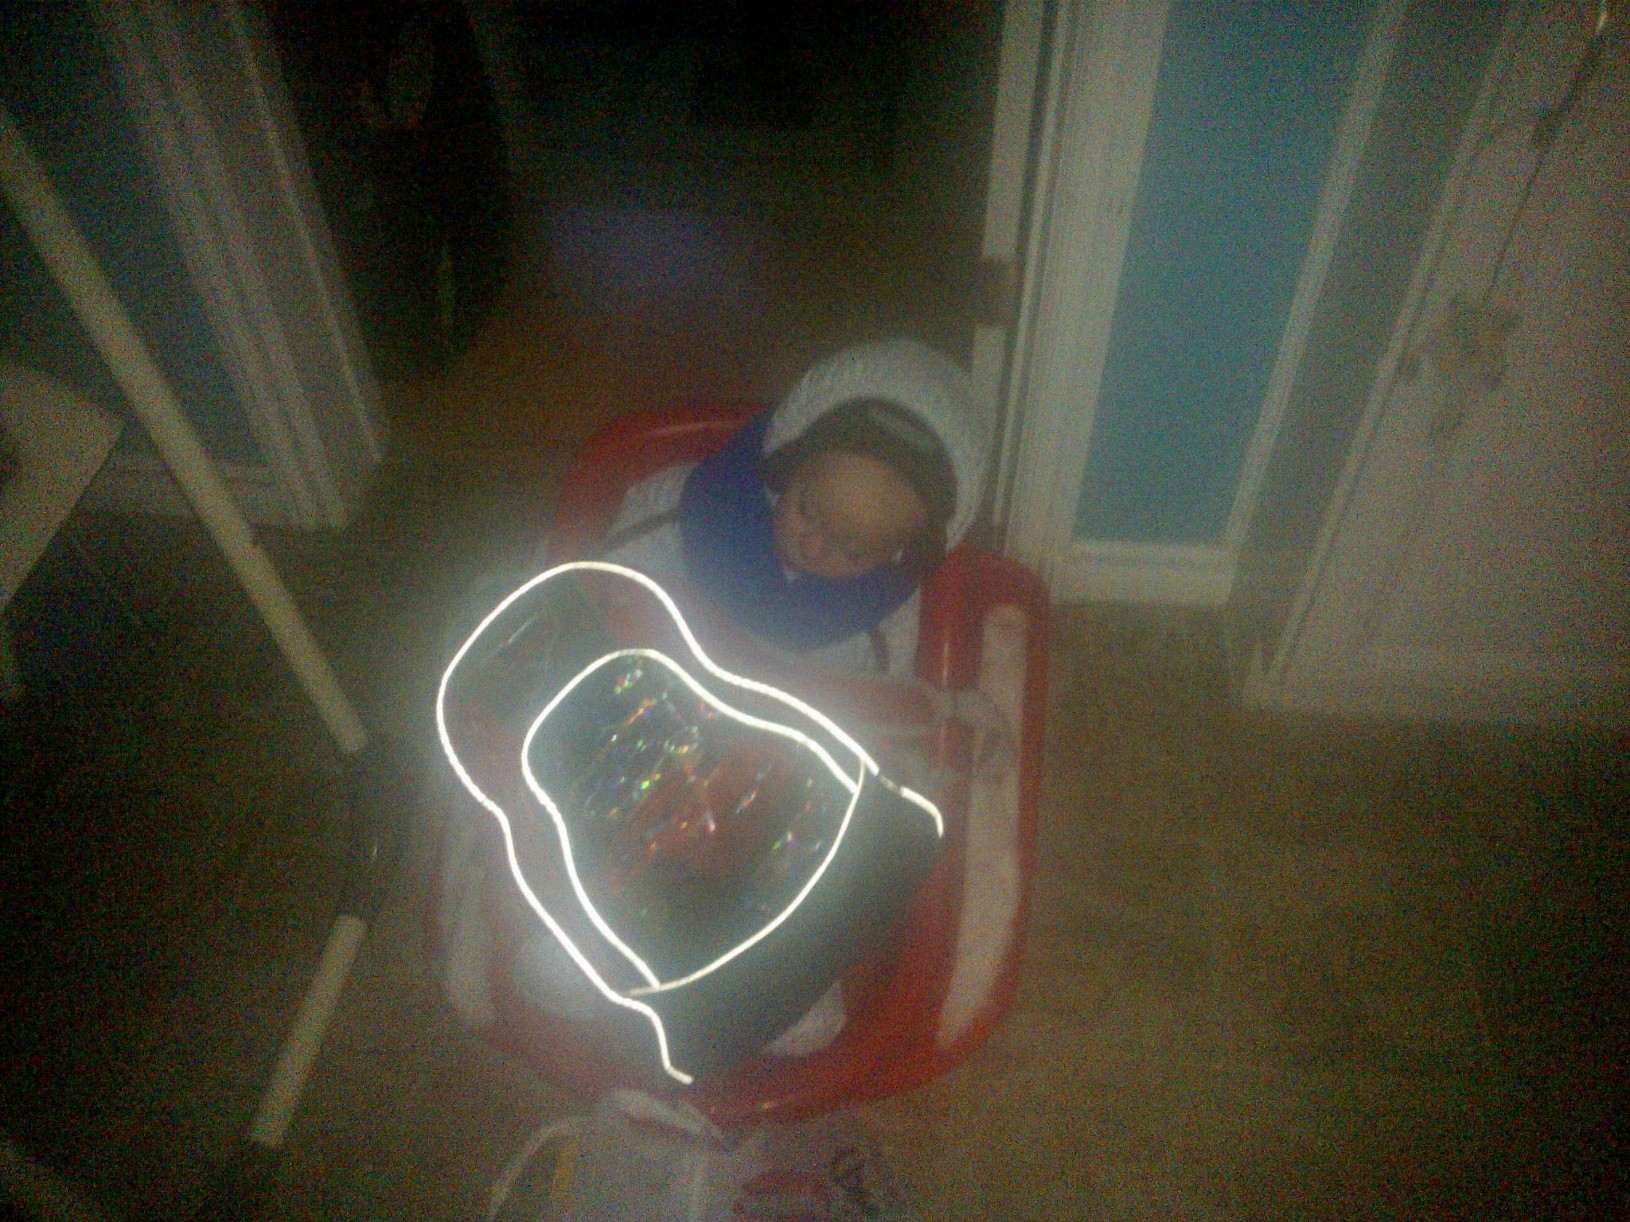 Ryder Sleeping In His Sled